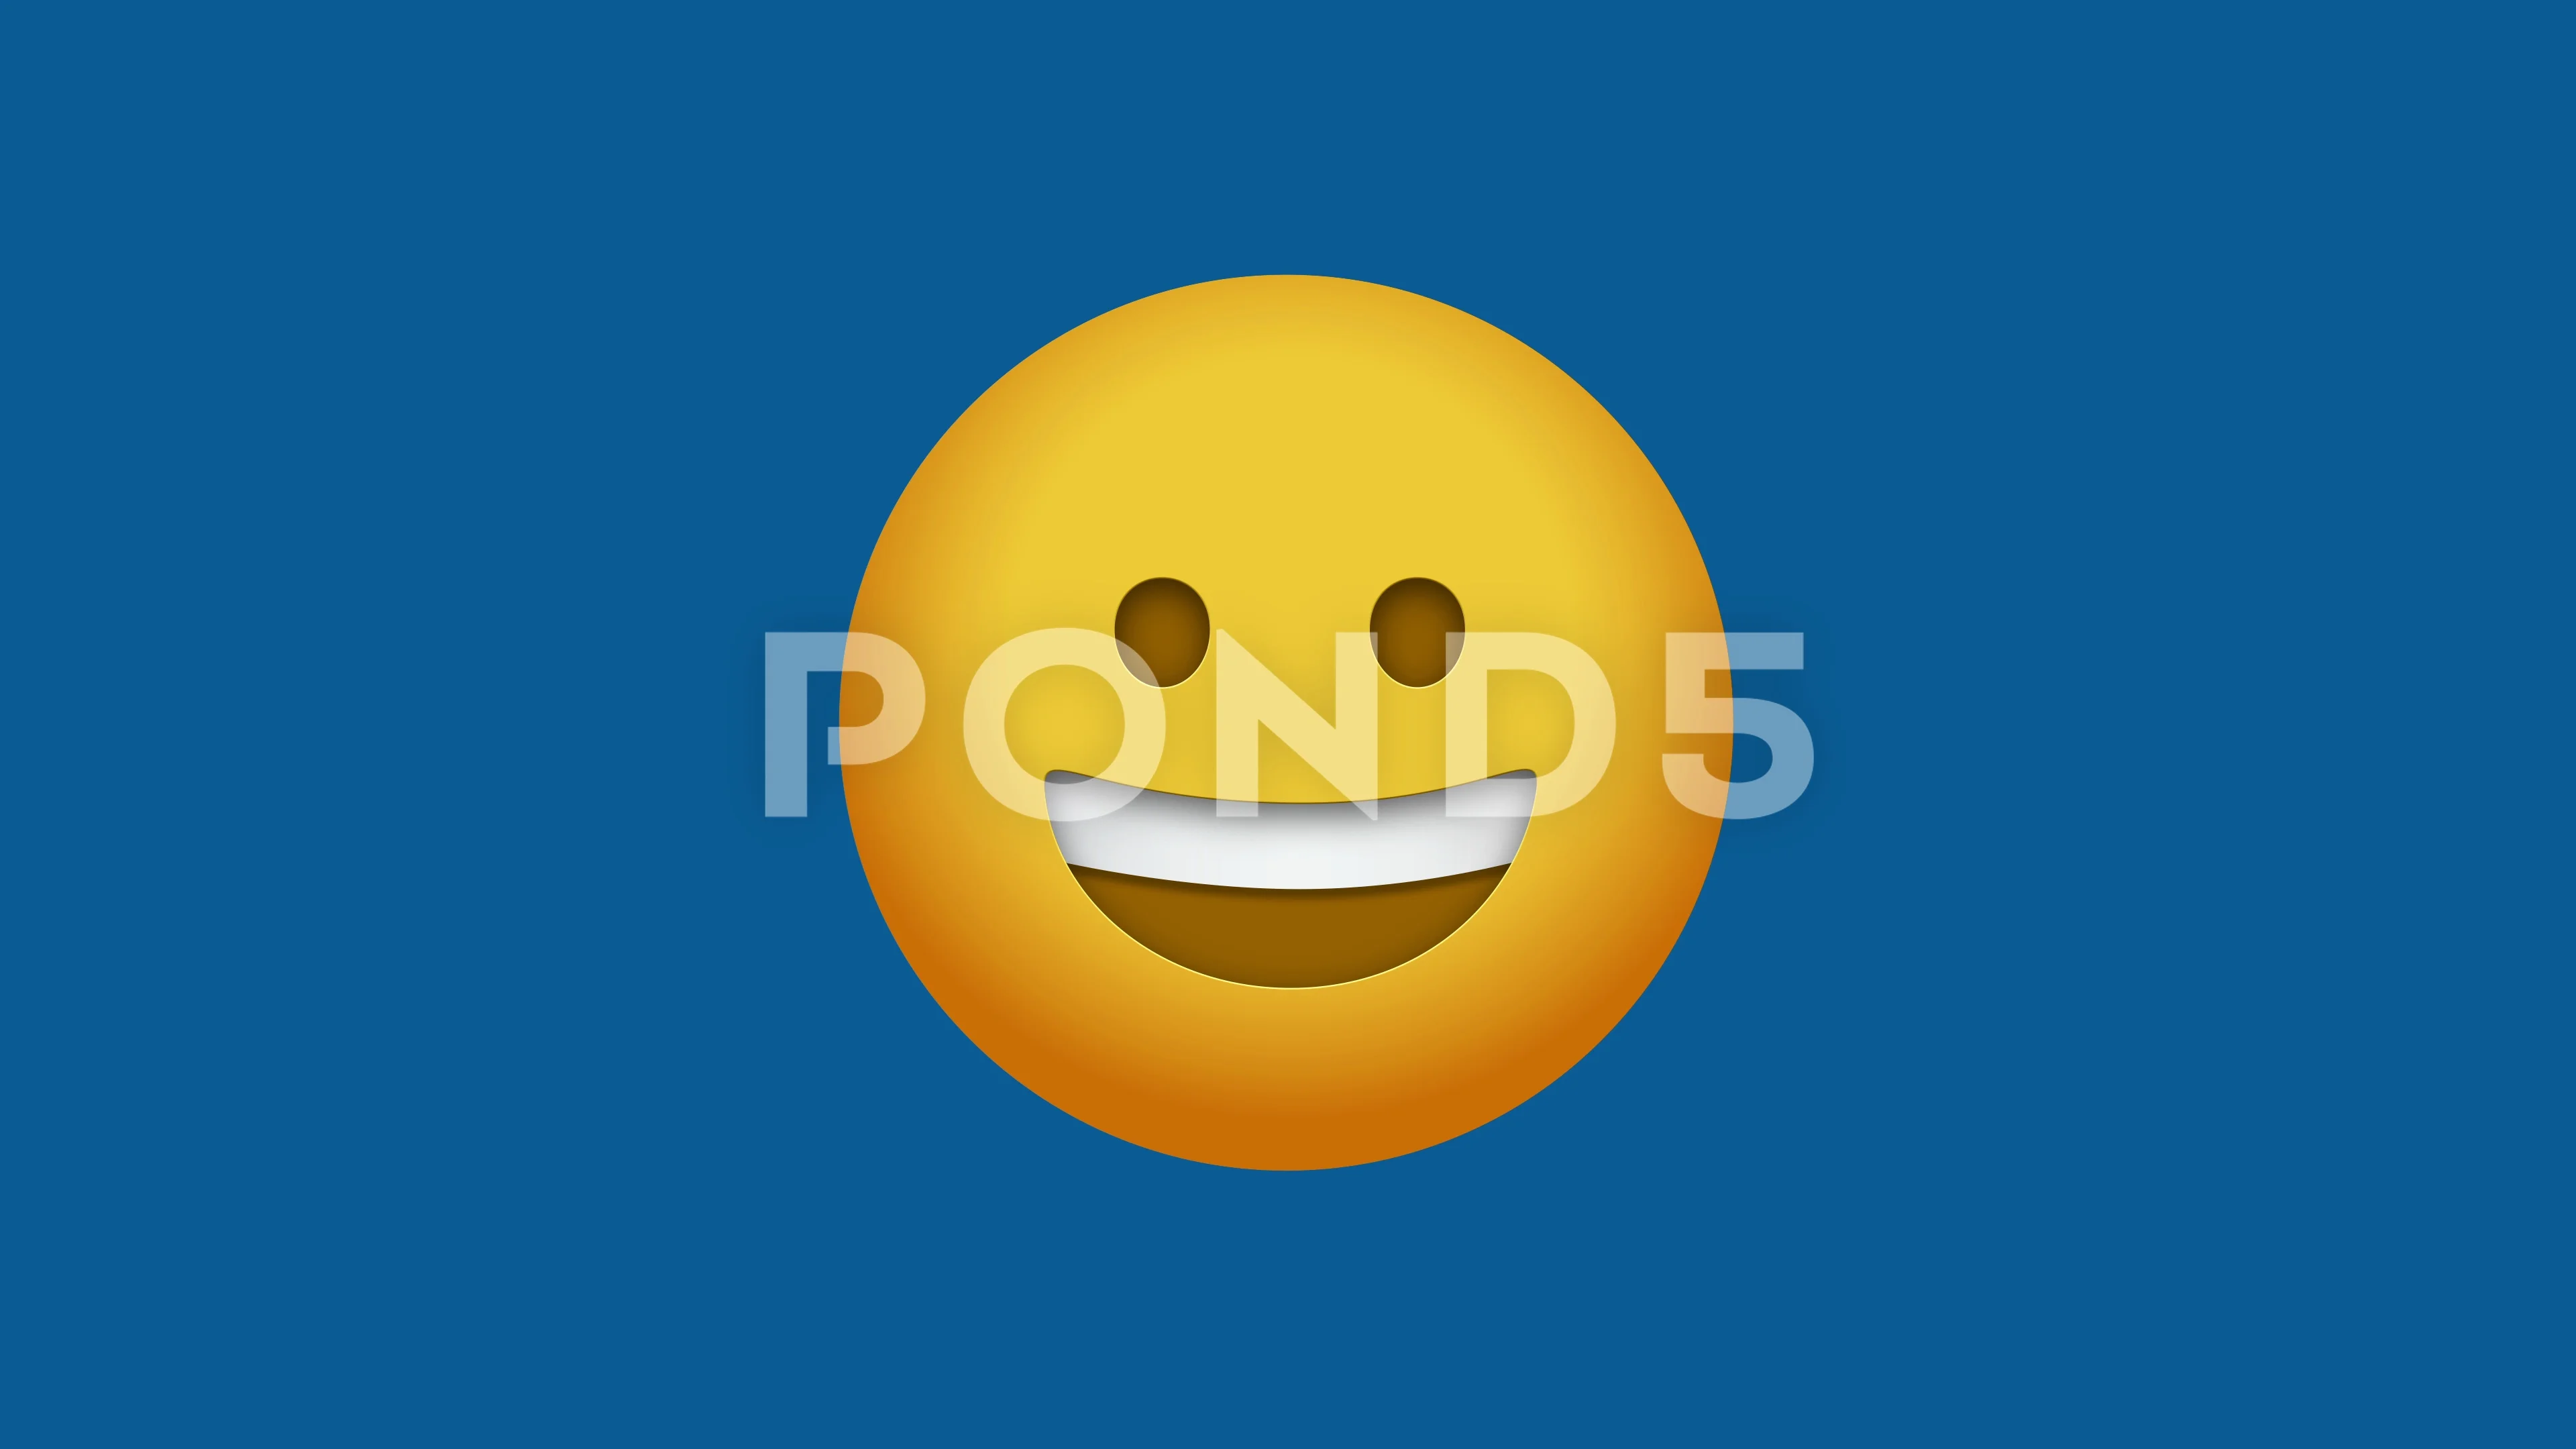 animated laughing smiley for email